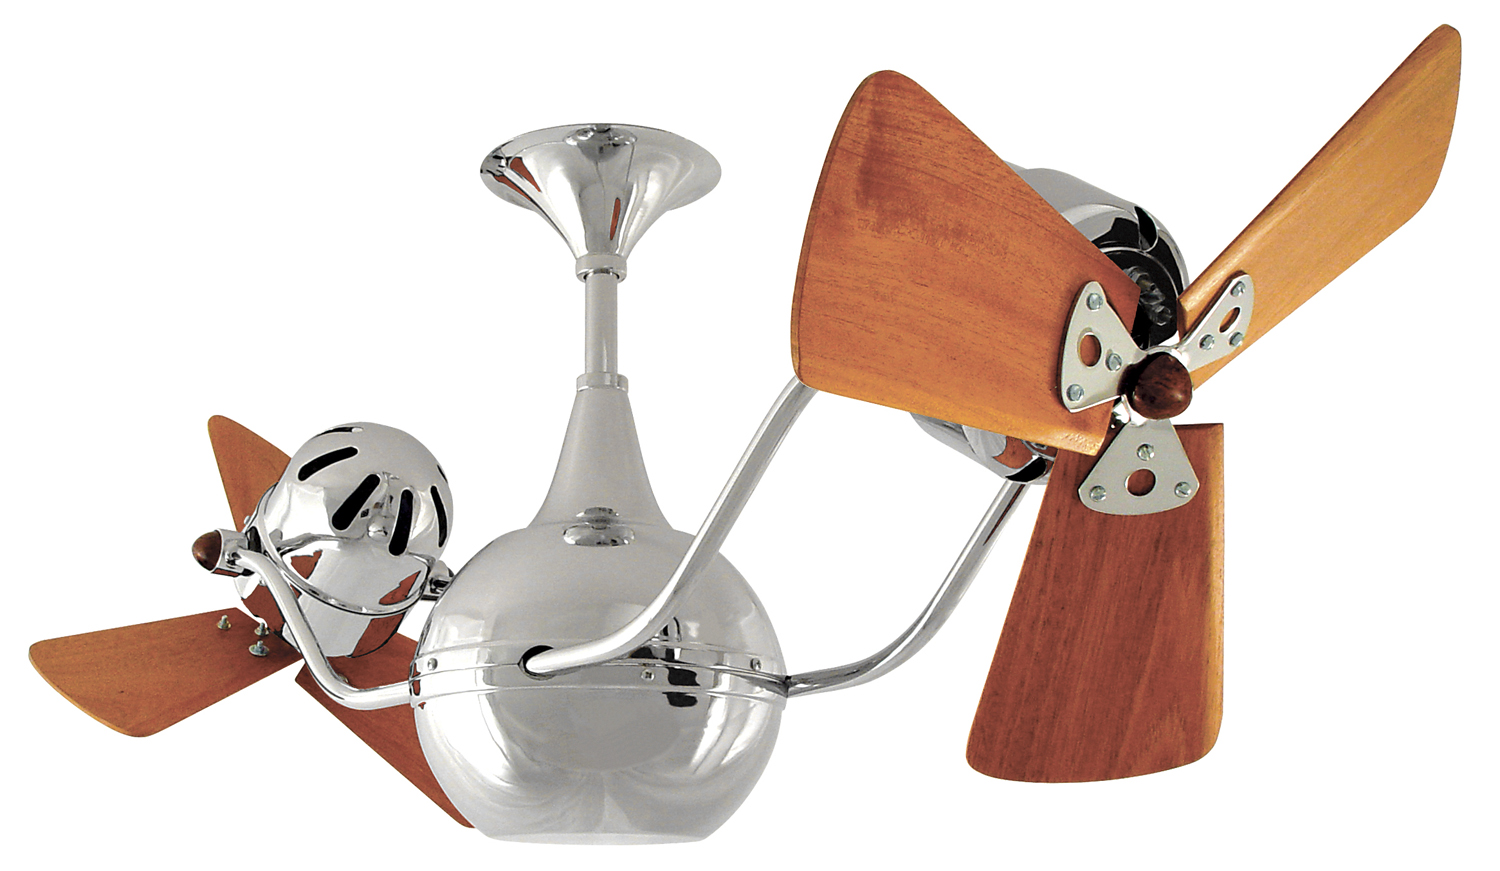 Vent-Bettina Rotational Dual Head Ceiling Fan in Polished Chrome Finish with Mahogany Wood Blades